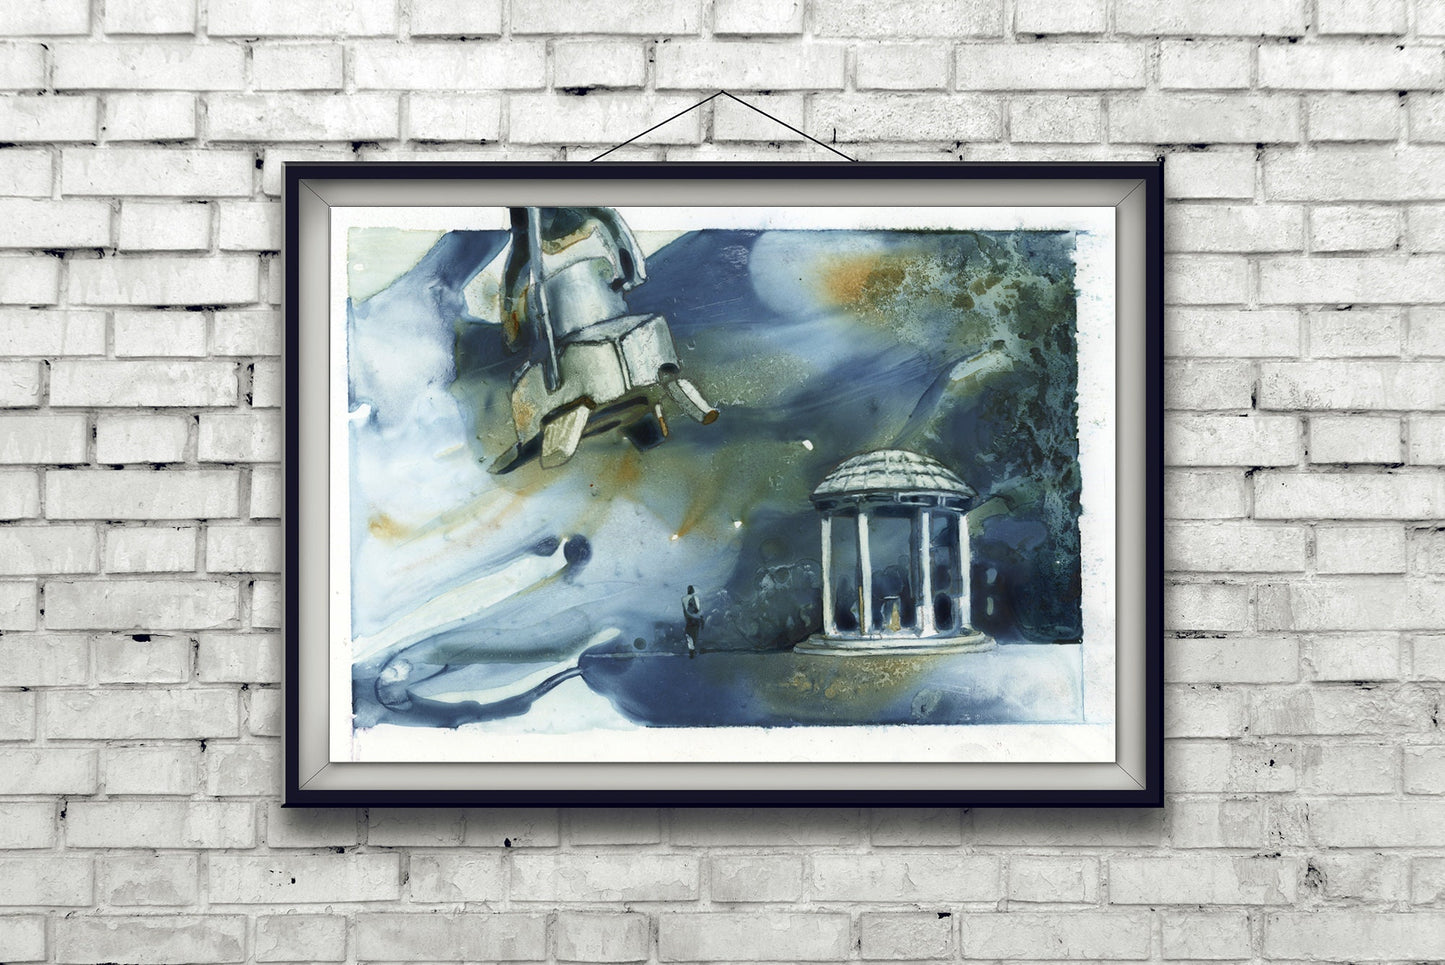 UNC Old Well in Chapel Hill being attacked by robot foot- North Carolina.  Watercolor painting UNC Well NC university robot attack funny (print)